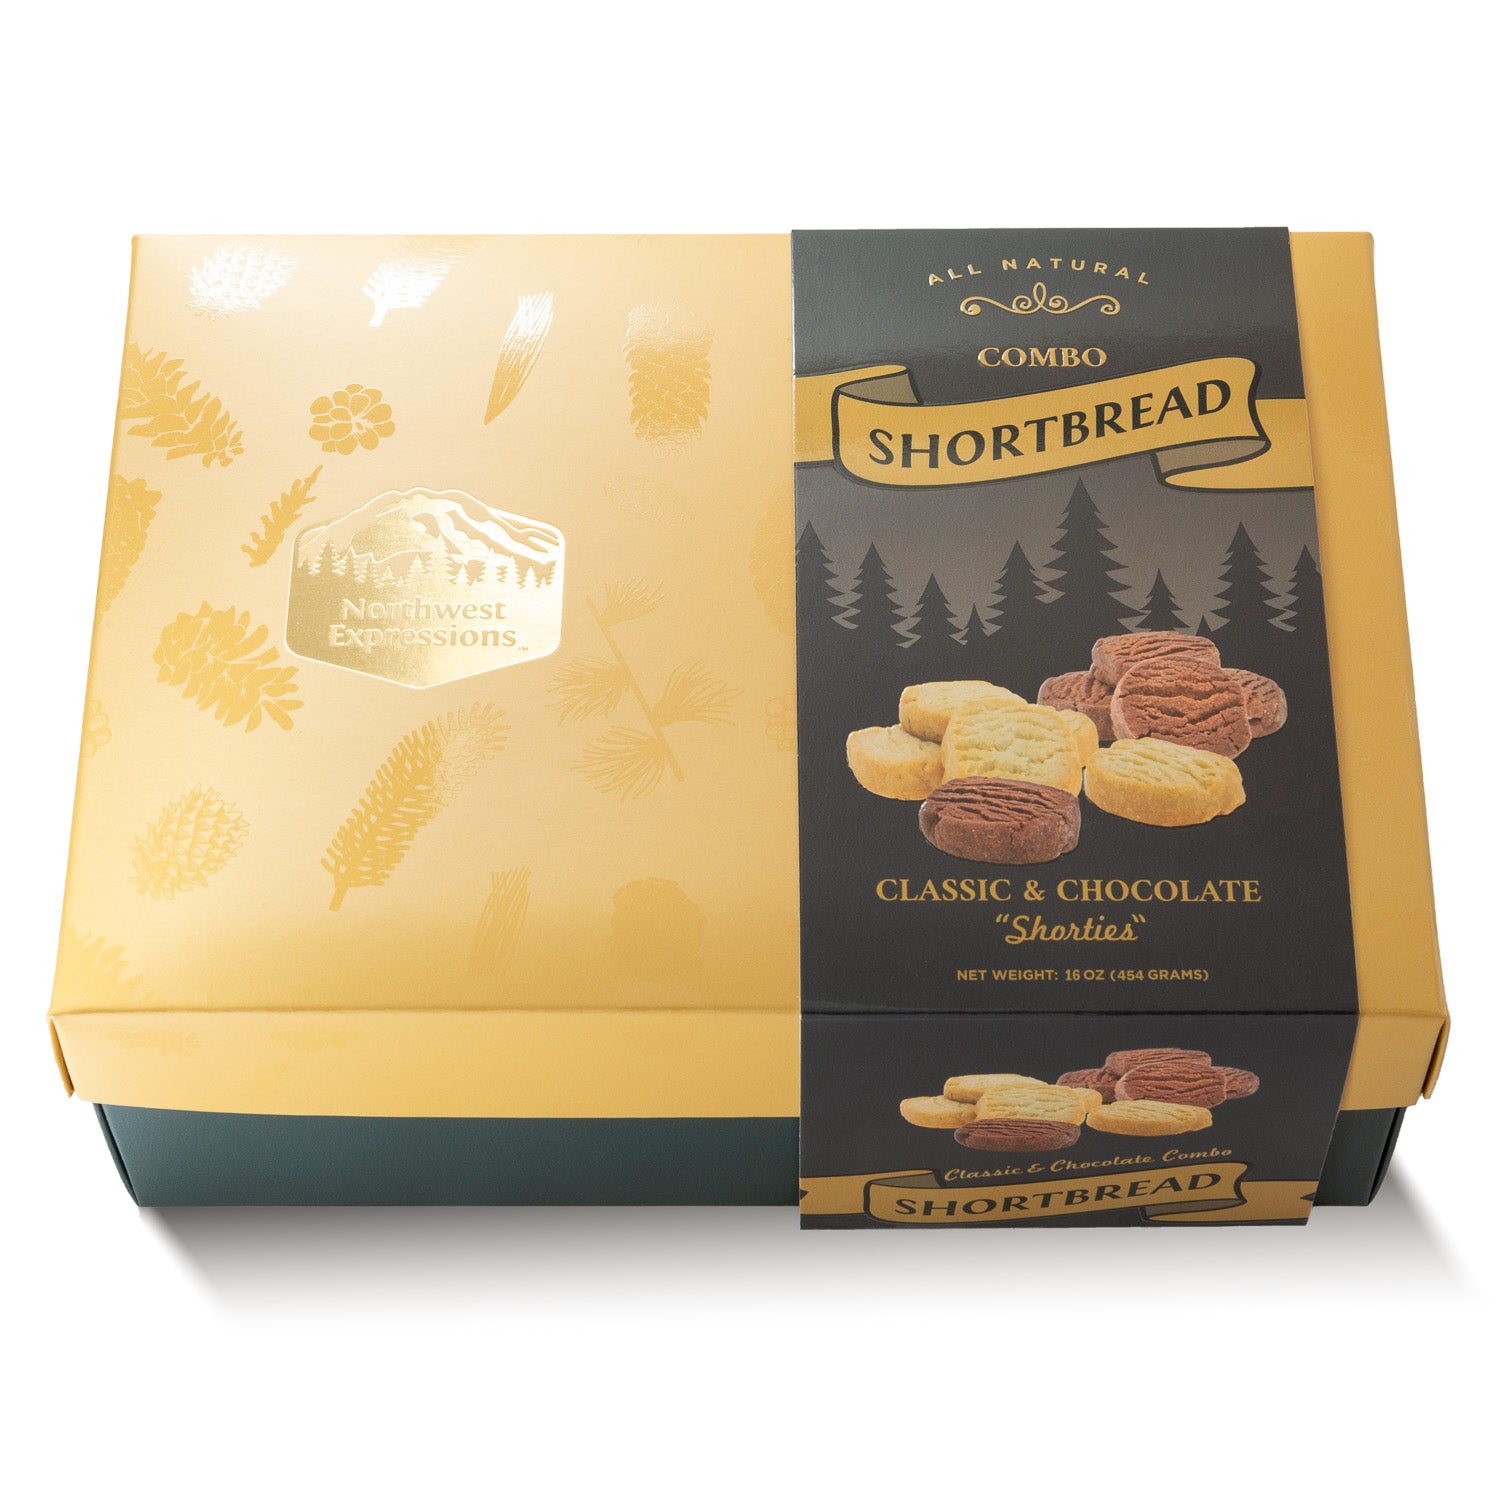 top view of the 16 ounce gift box of combo shortbread